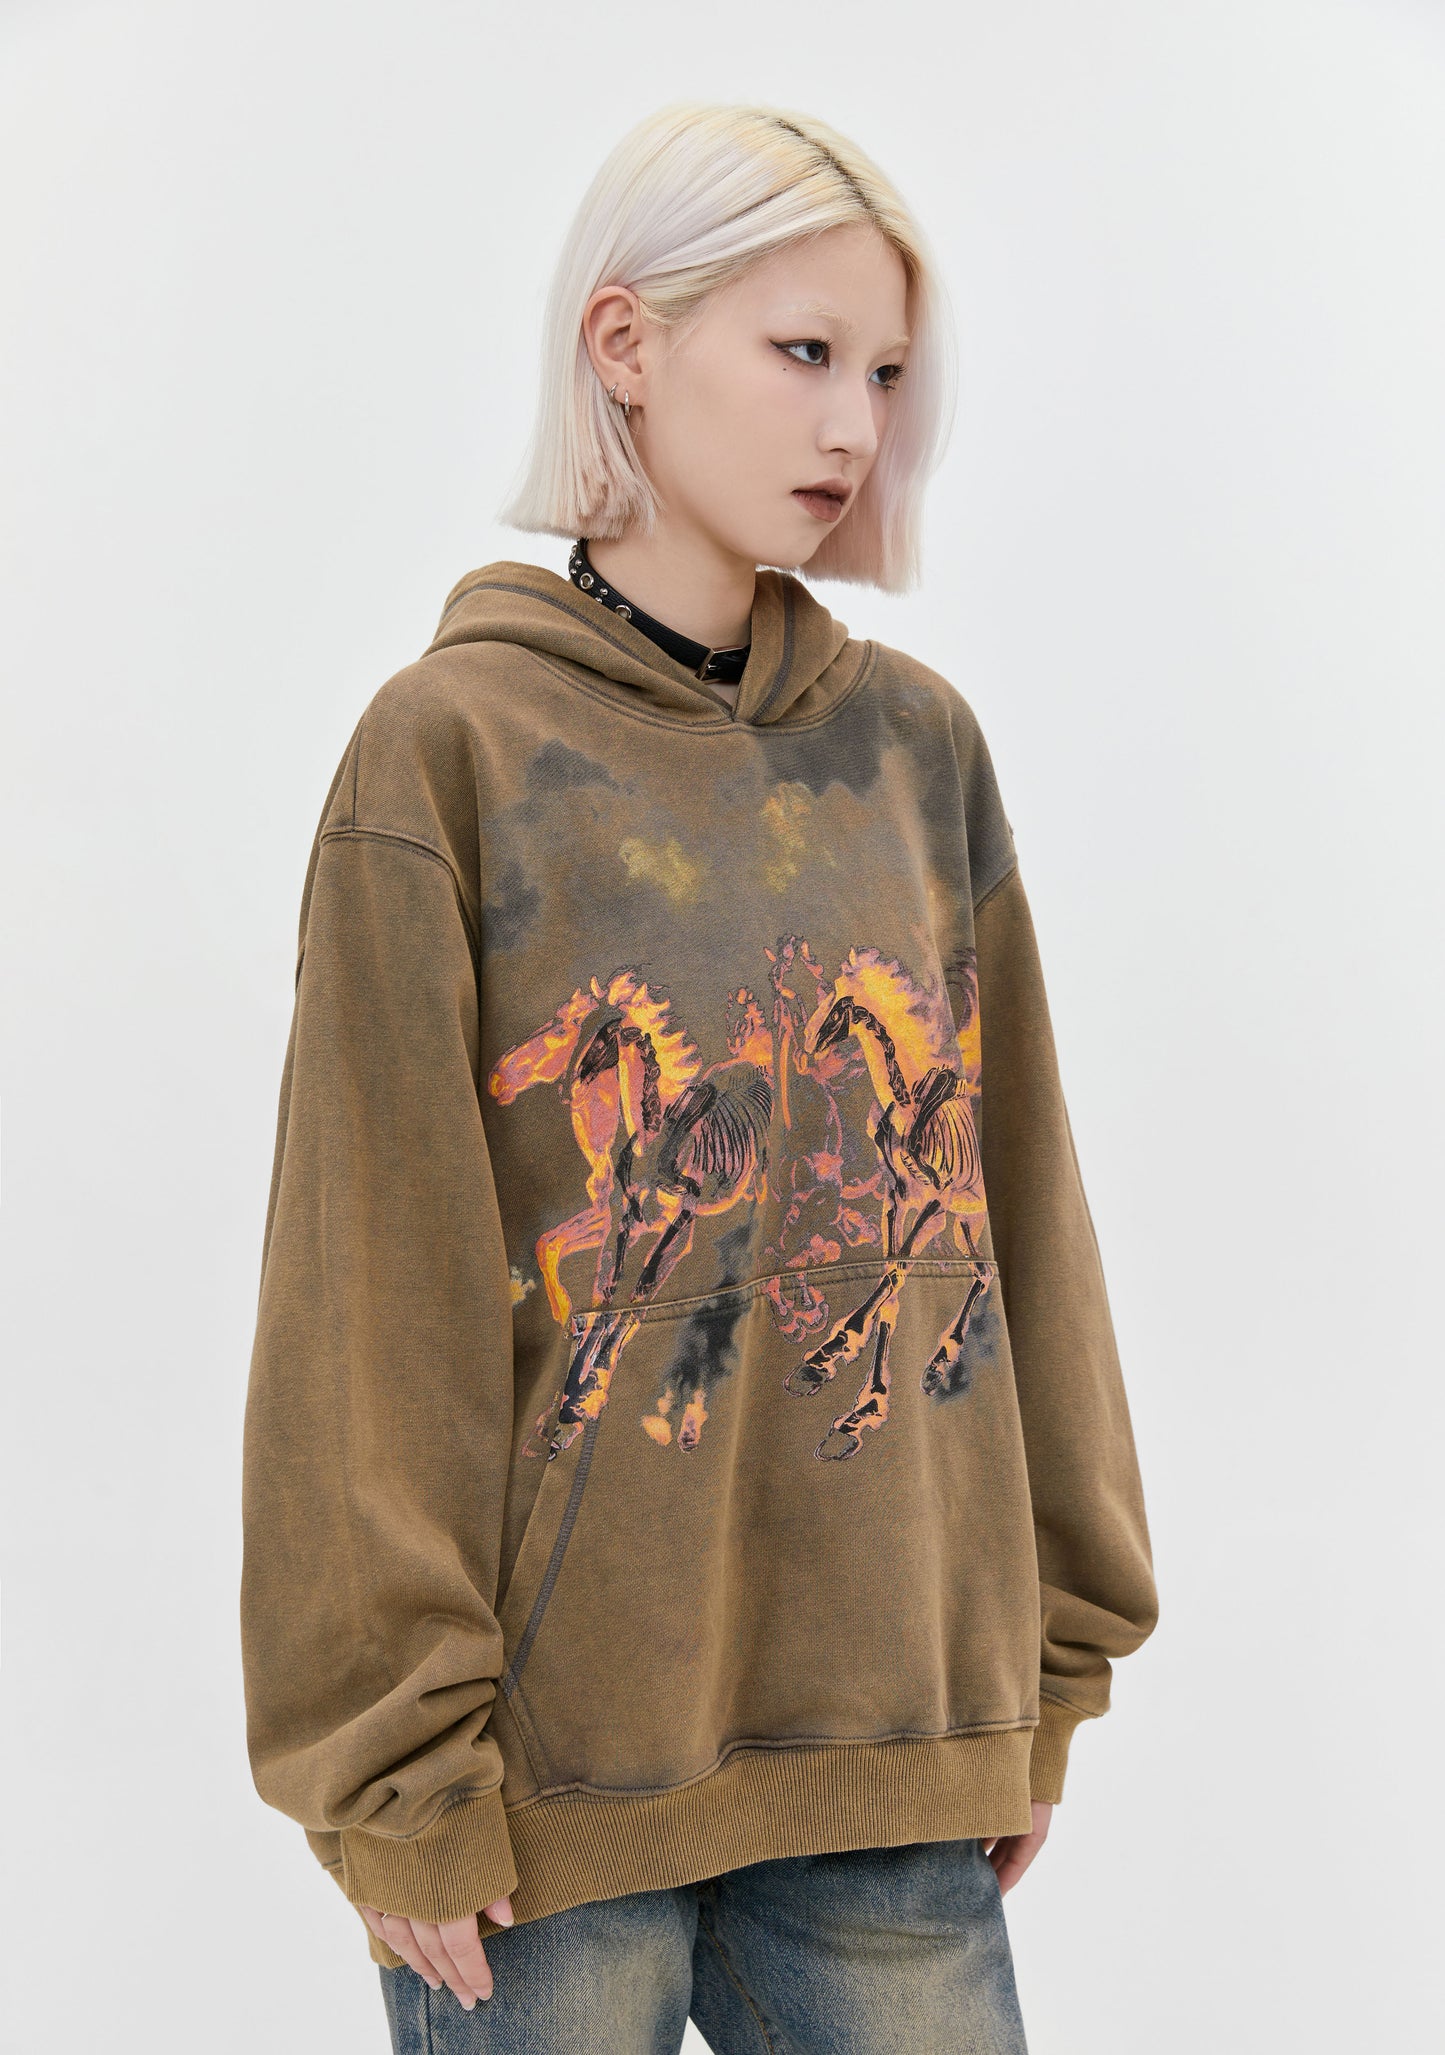 HORSES RETURNING FROM THE DEAD HOODIE